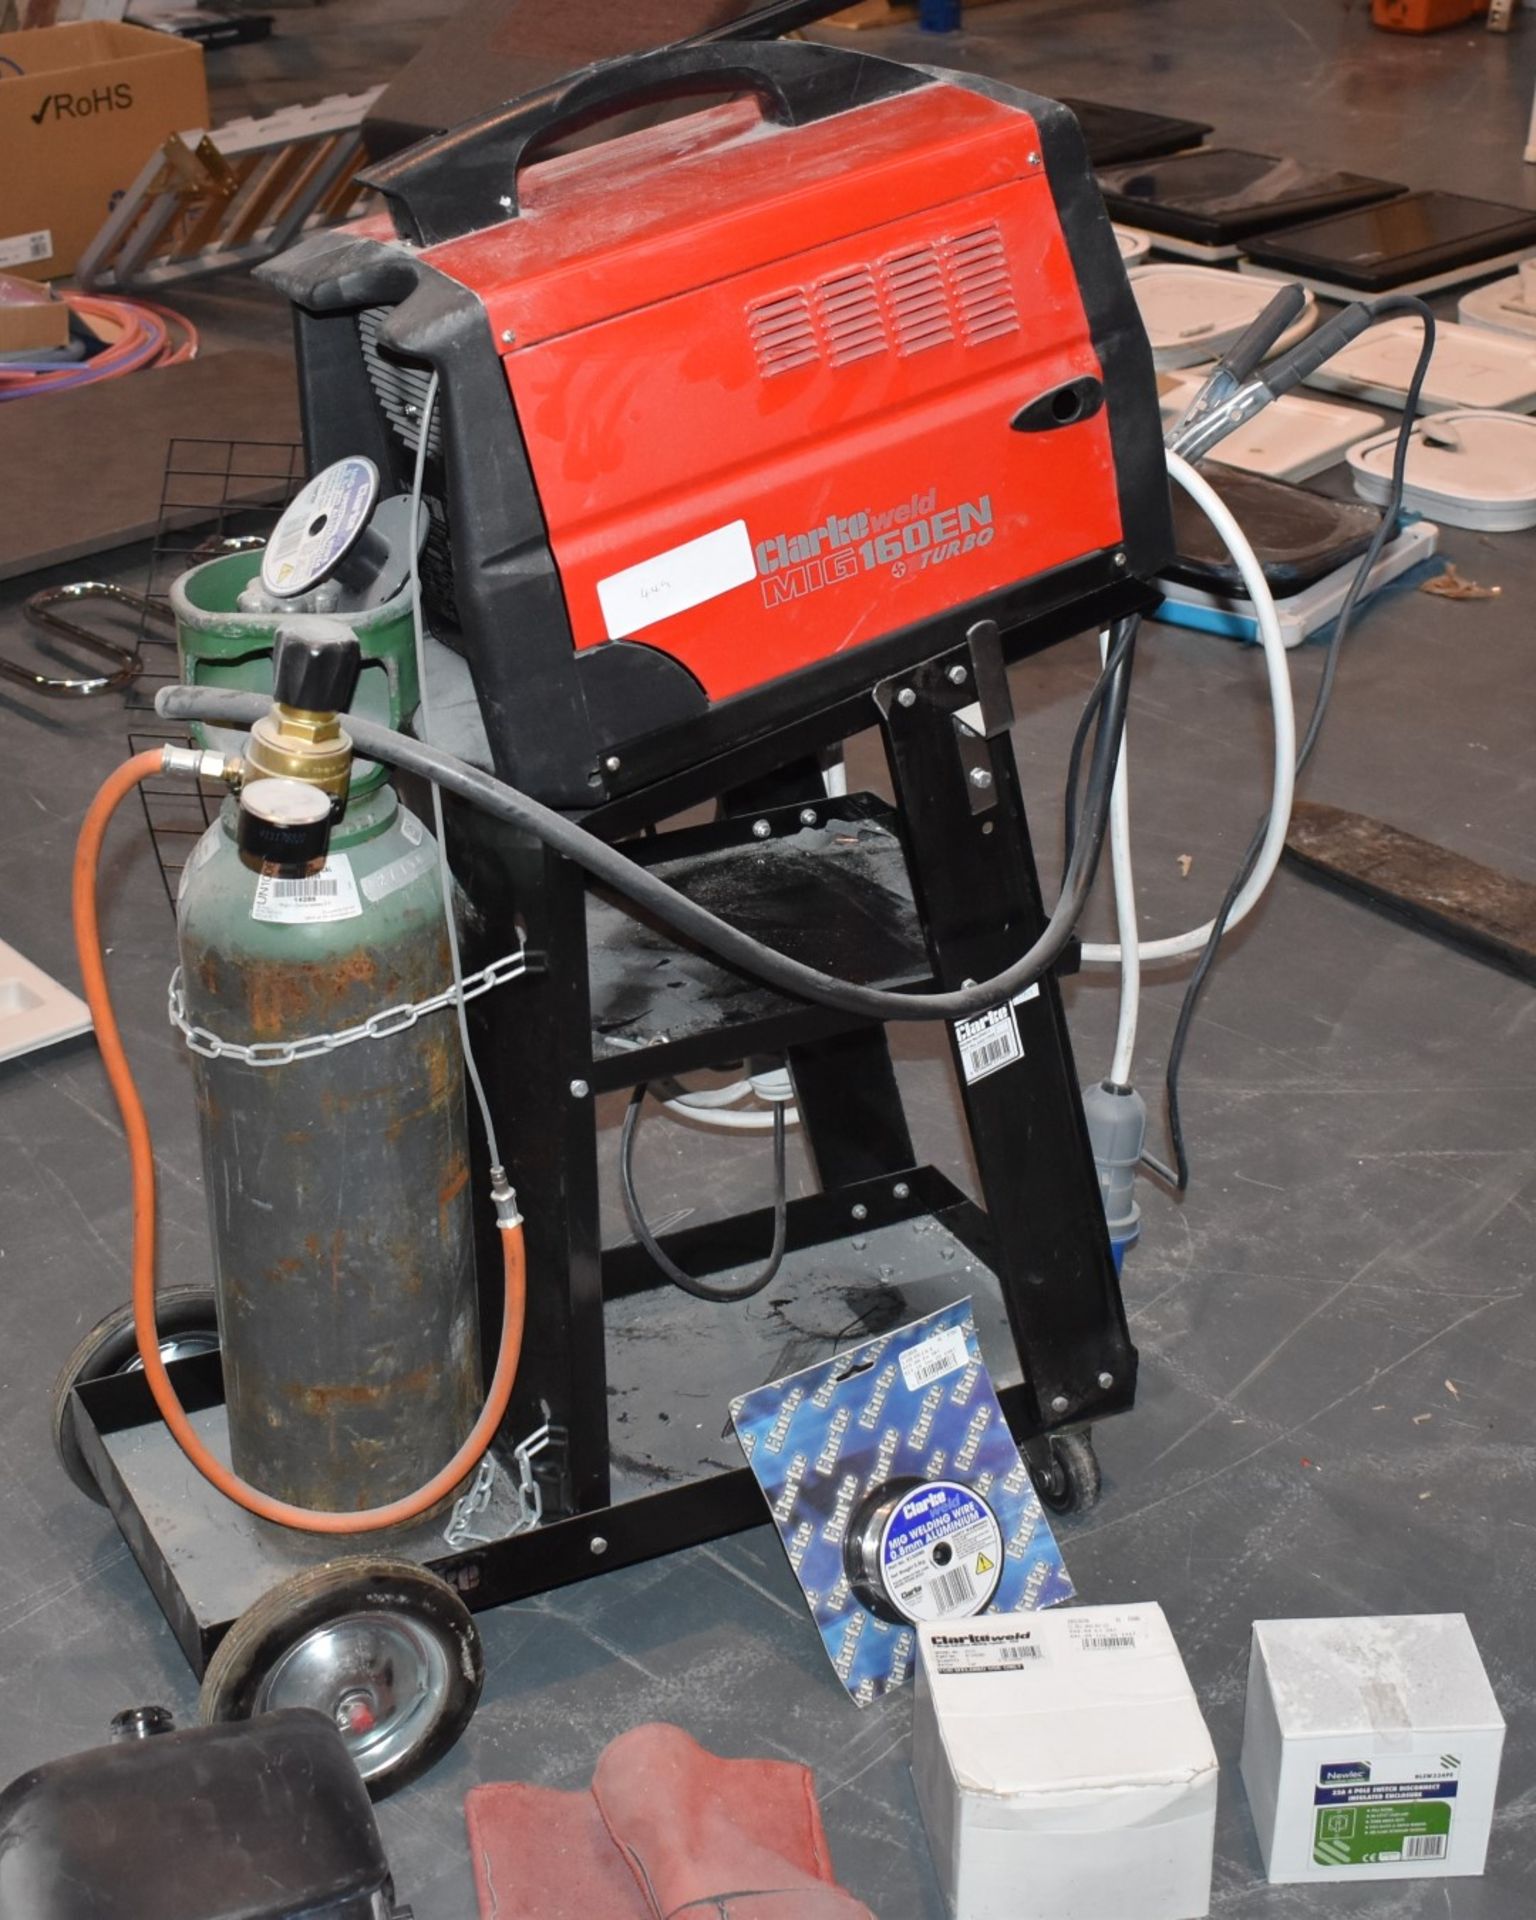 1 x Clarke MIG160EN Turbo No-Gas/Gas MIG Welder With Stand and Accessories - Ref 449 - CL501 - - Image 3 of 11